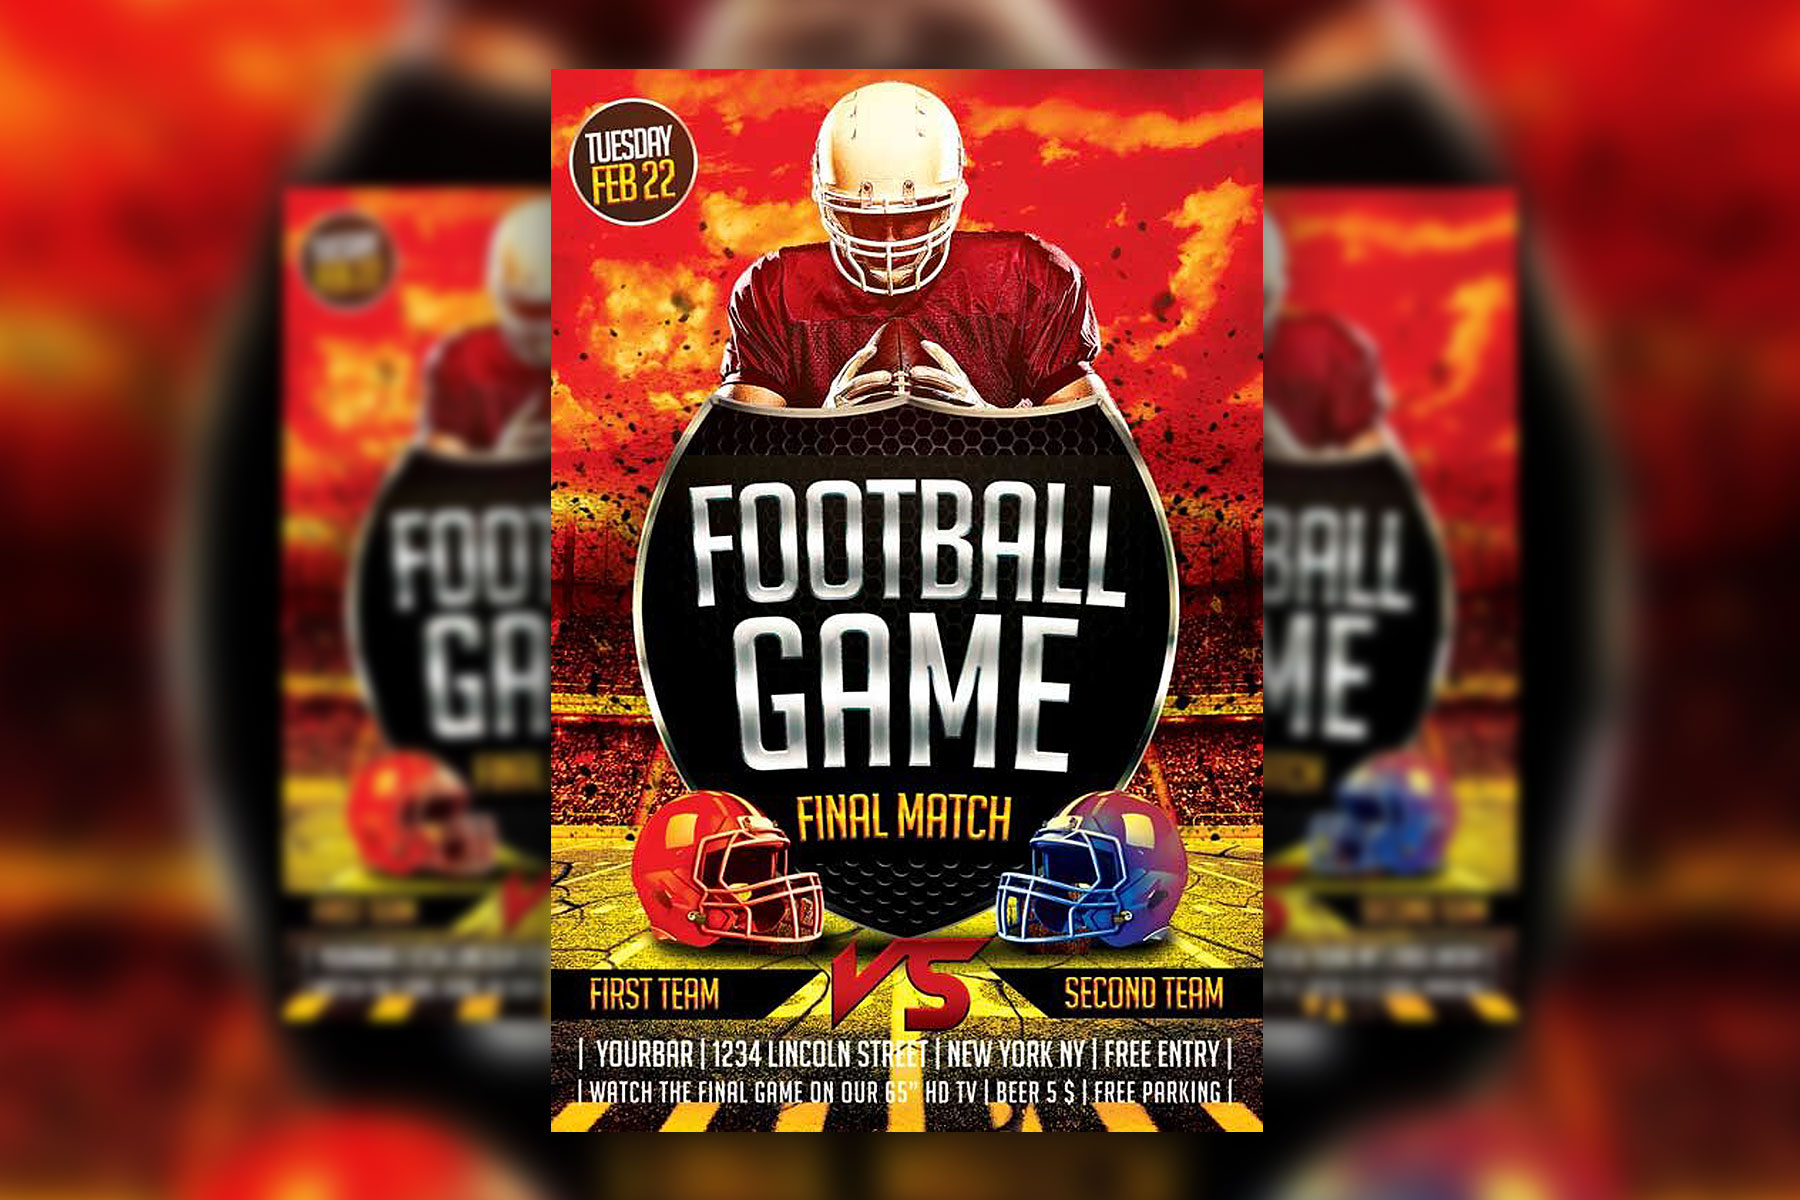 Watching Football Match at the Bar Flyer Template (FREE)